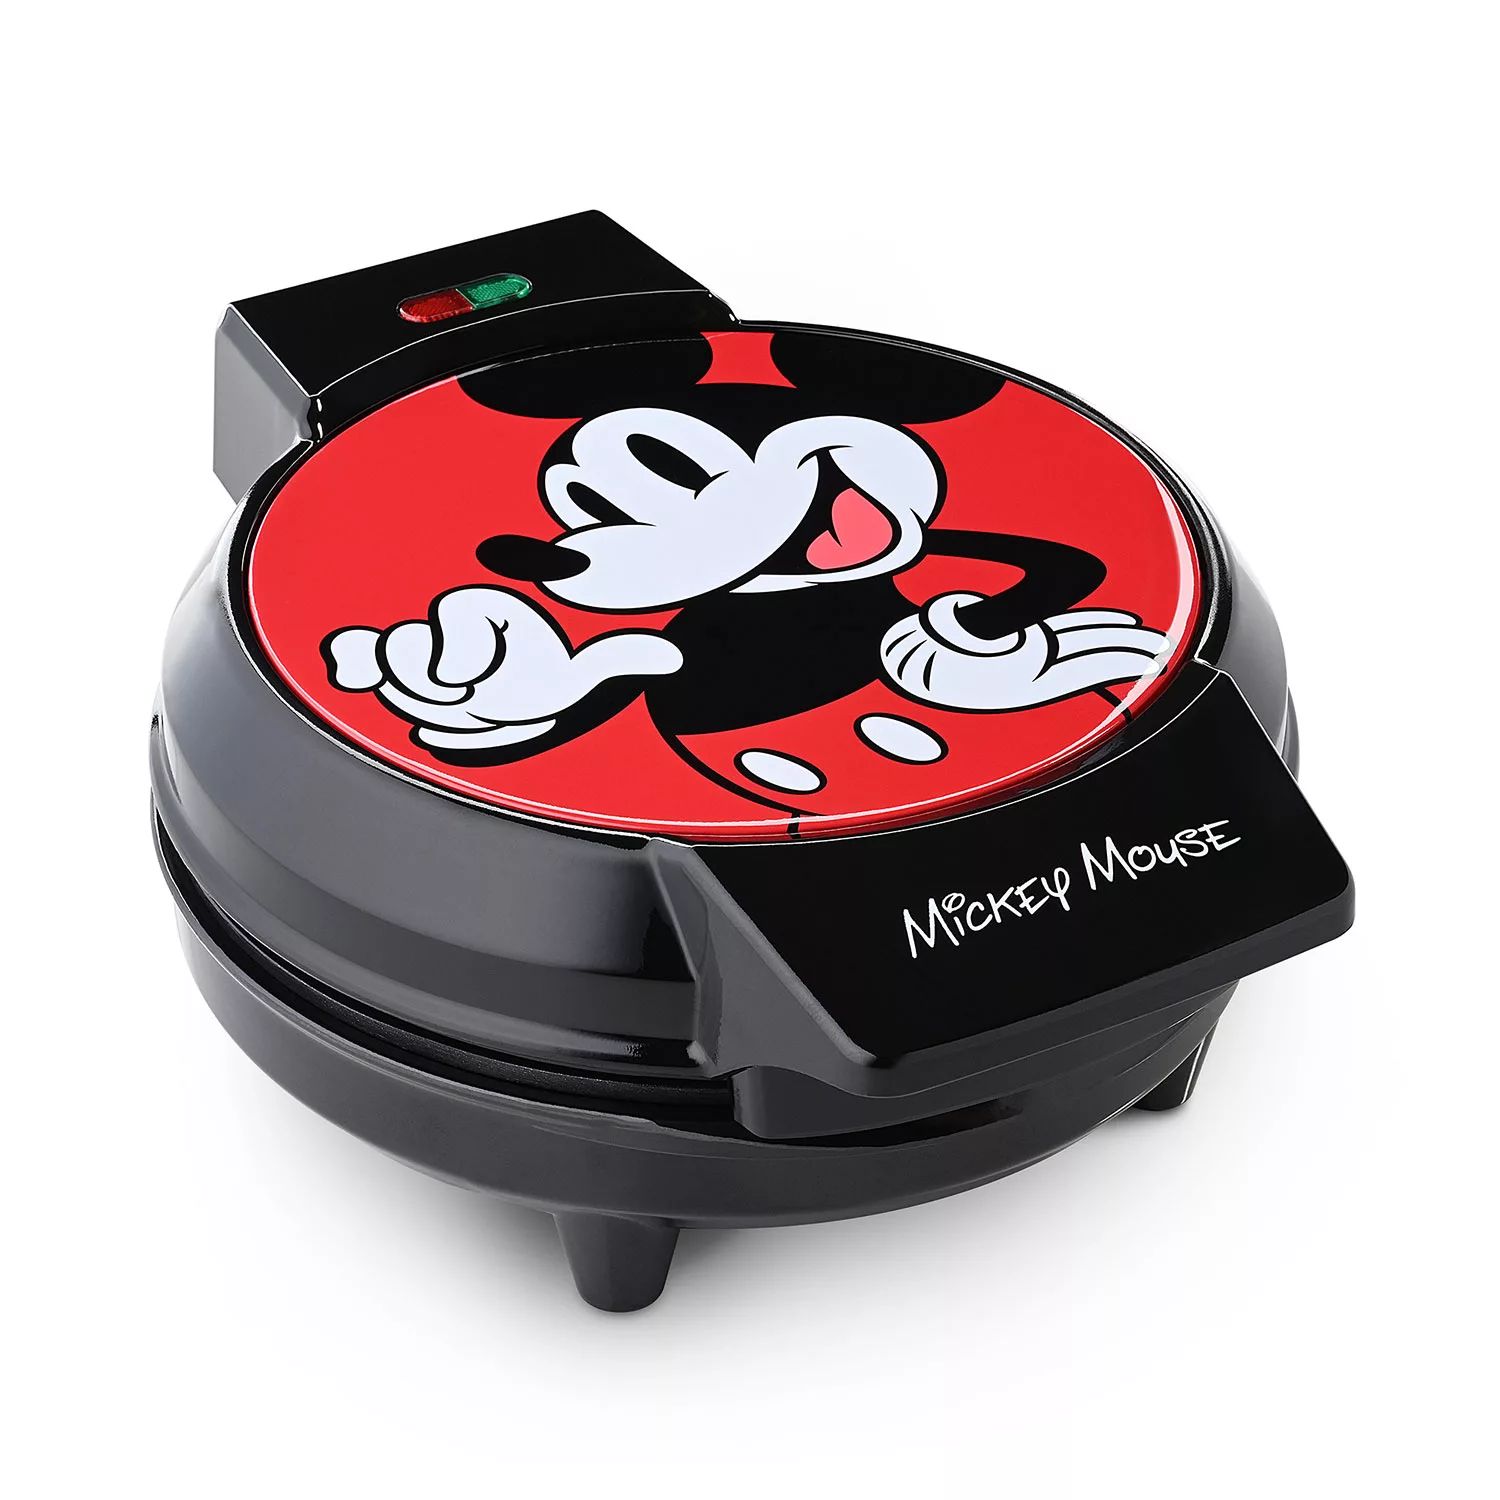 Mickey Mouse 7" Round Waffle Maker, Ceramic Non-Stick Cooking Plates		 - Sam's Club | Sam's Club